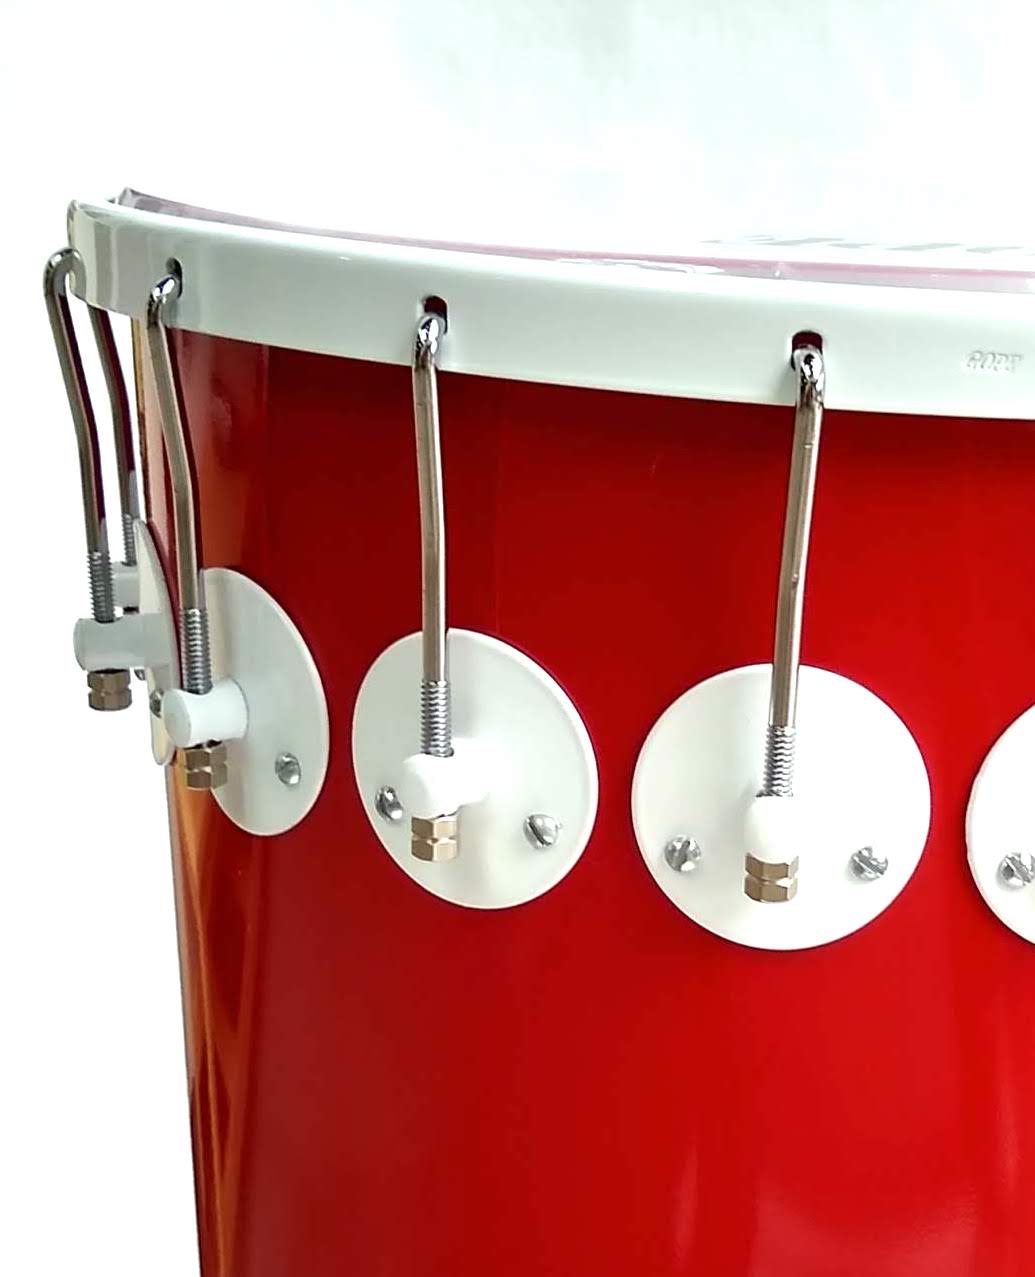 Timbal, Red and White, Aluminum body, 16 lugs, 14" X 90cm, GOPE